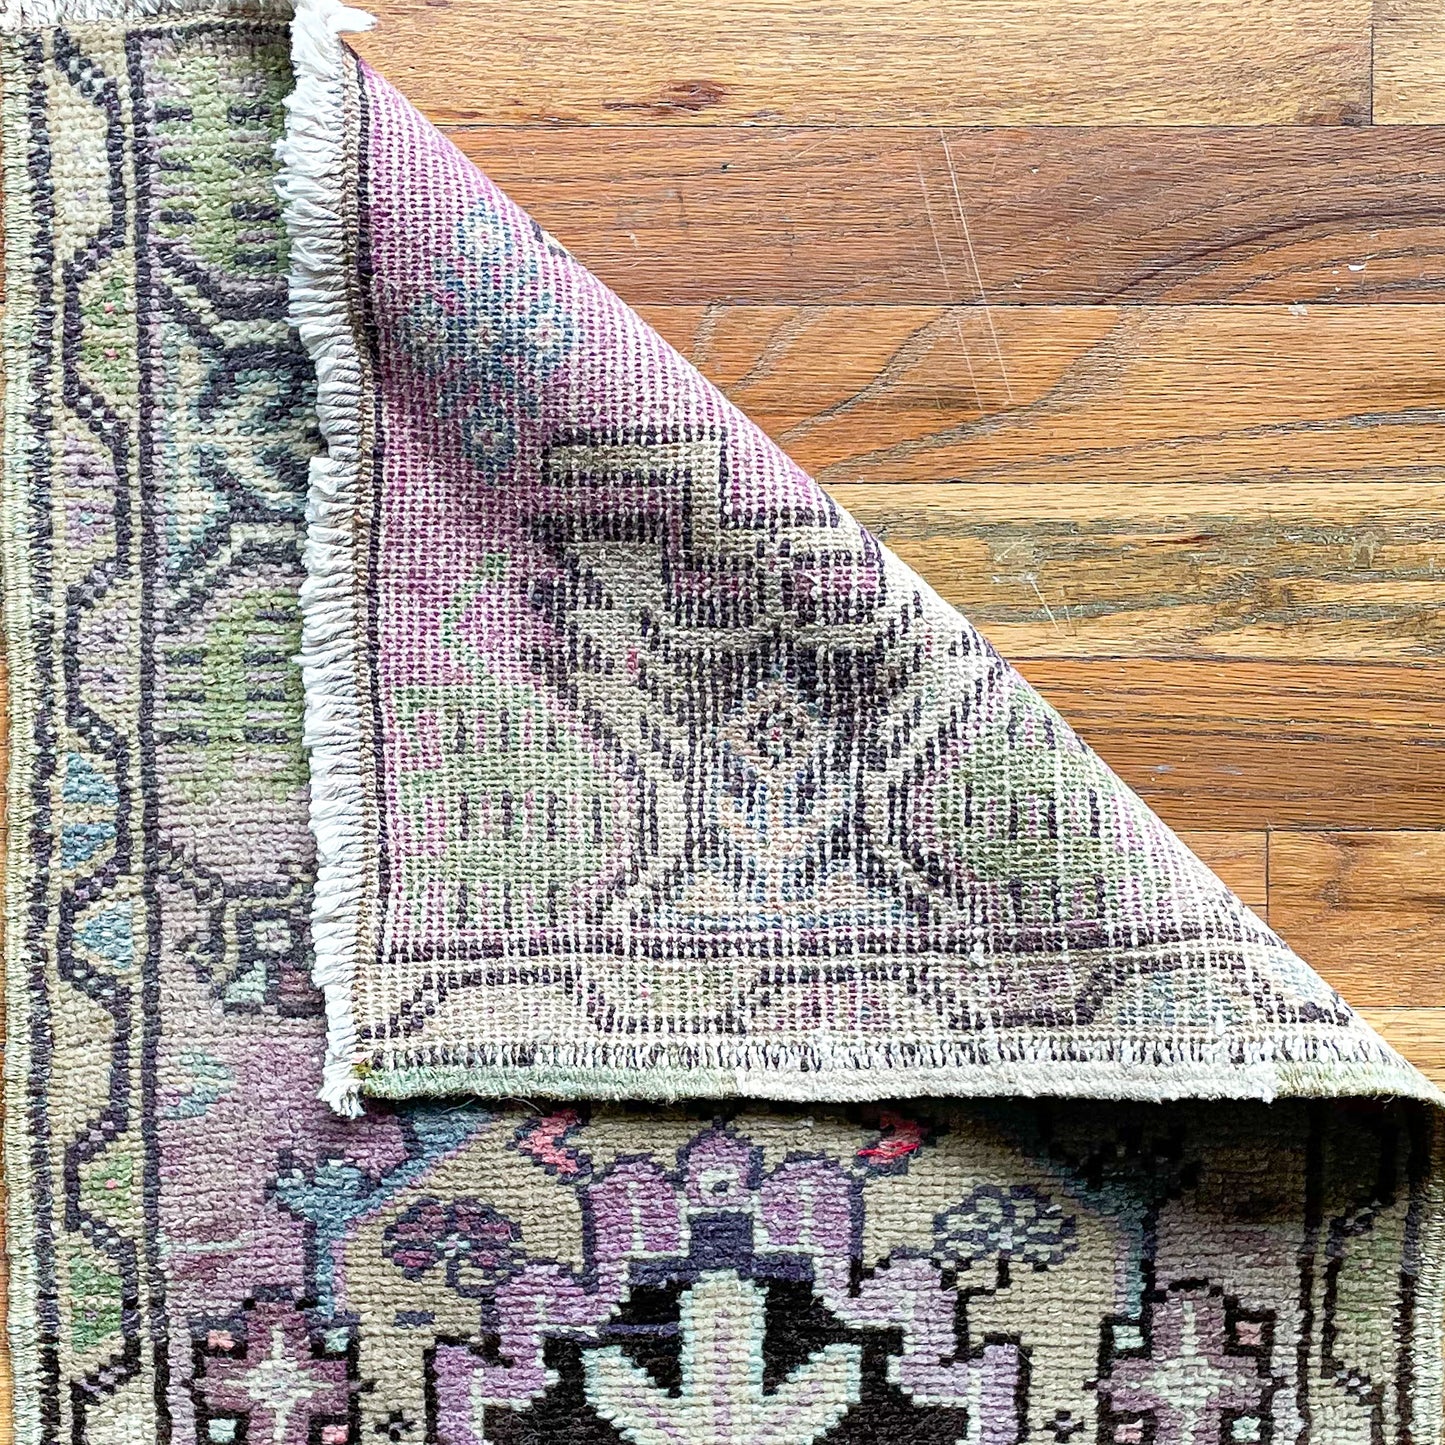 Woven Turkish mini rug in purple, green, and black with one corner folded over to show woven underside.